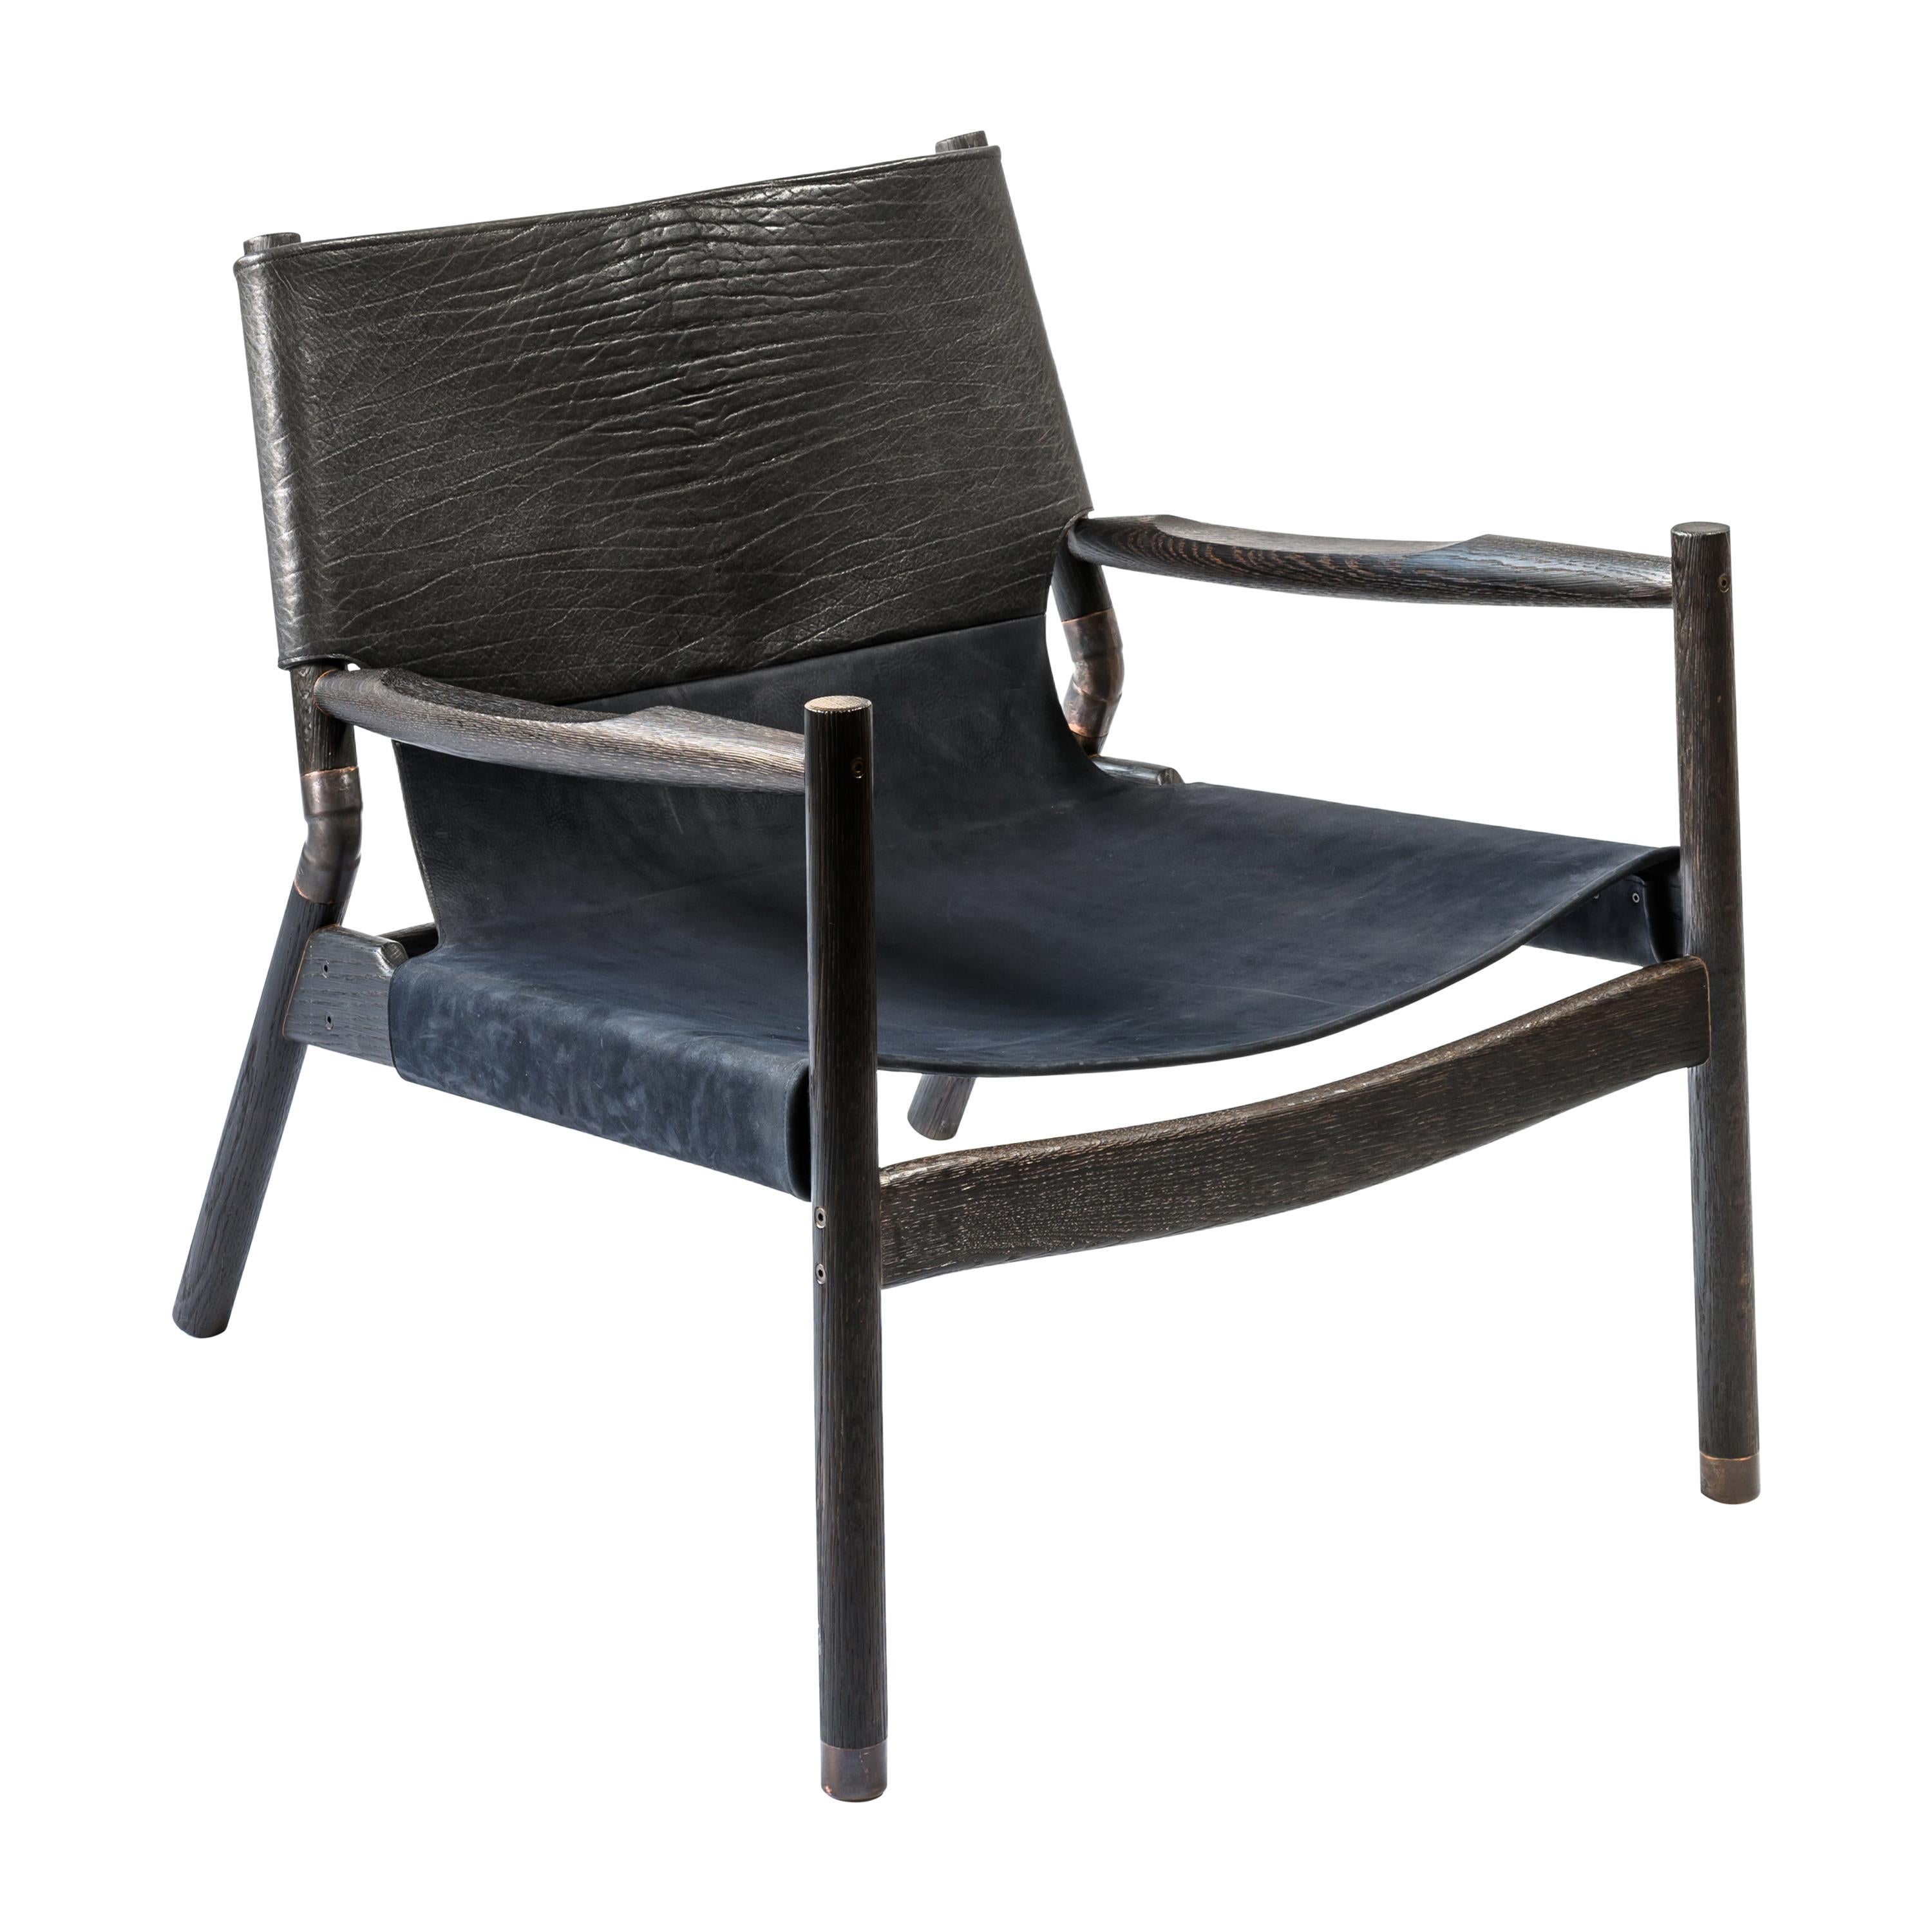 EÆ Slung Leather Lounge Chair in Bison/ Navy Nubuck Leather with Charred Oak For Sale